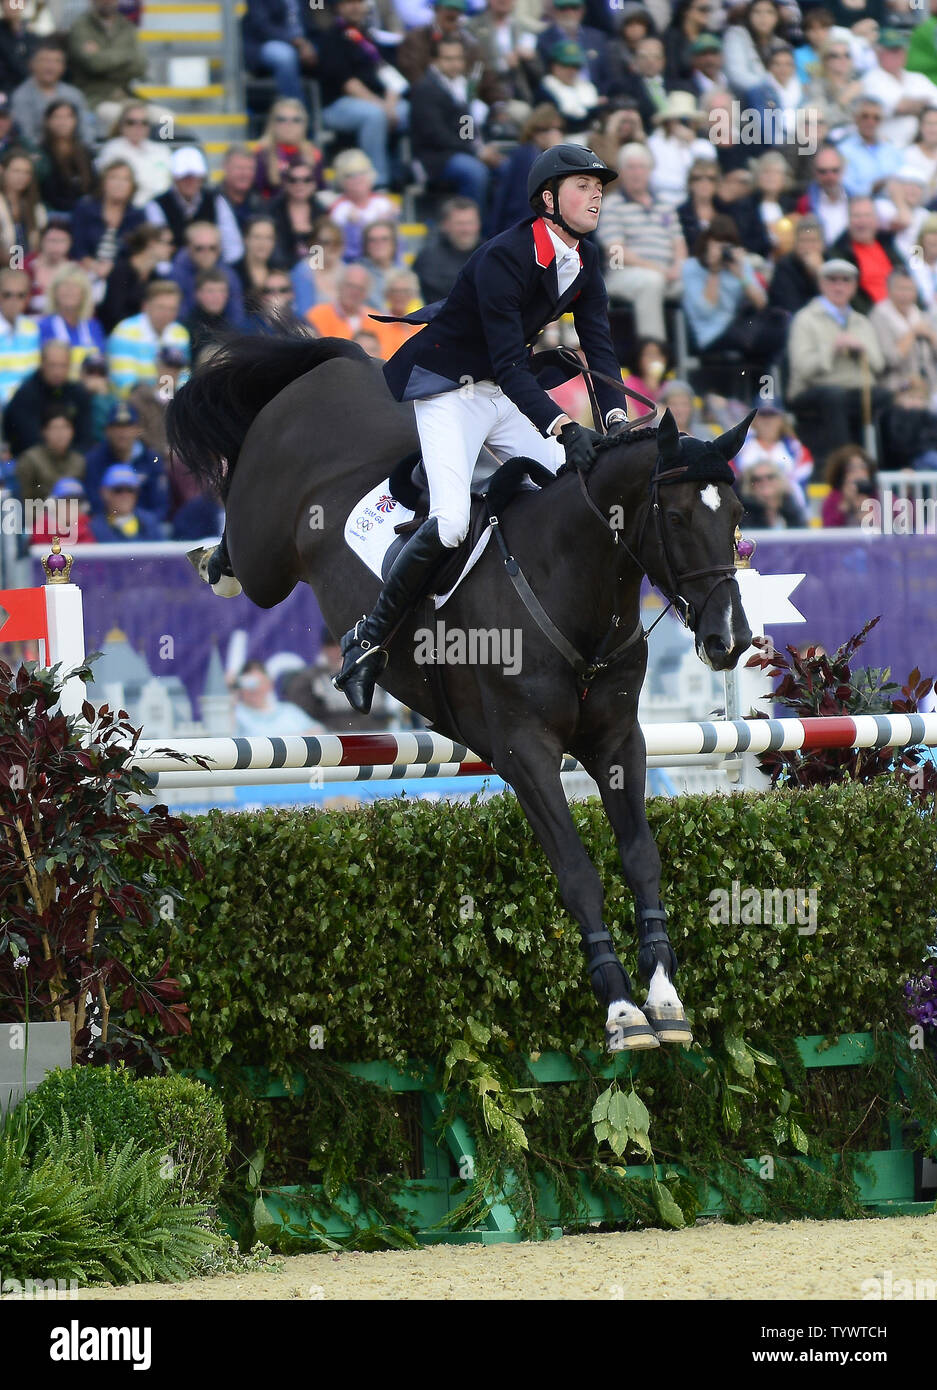 Ben Maher of the United Kingdom, riding Tripple X, competes in the 'Jump Off' for the Gold Medal against the Netherlands in the Equestrian Individual Jumping competition at the London 2012 Summer Olympics on August 5, 2012 in London.   UPI/Ron Sachs Stock Photo